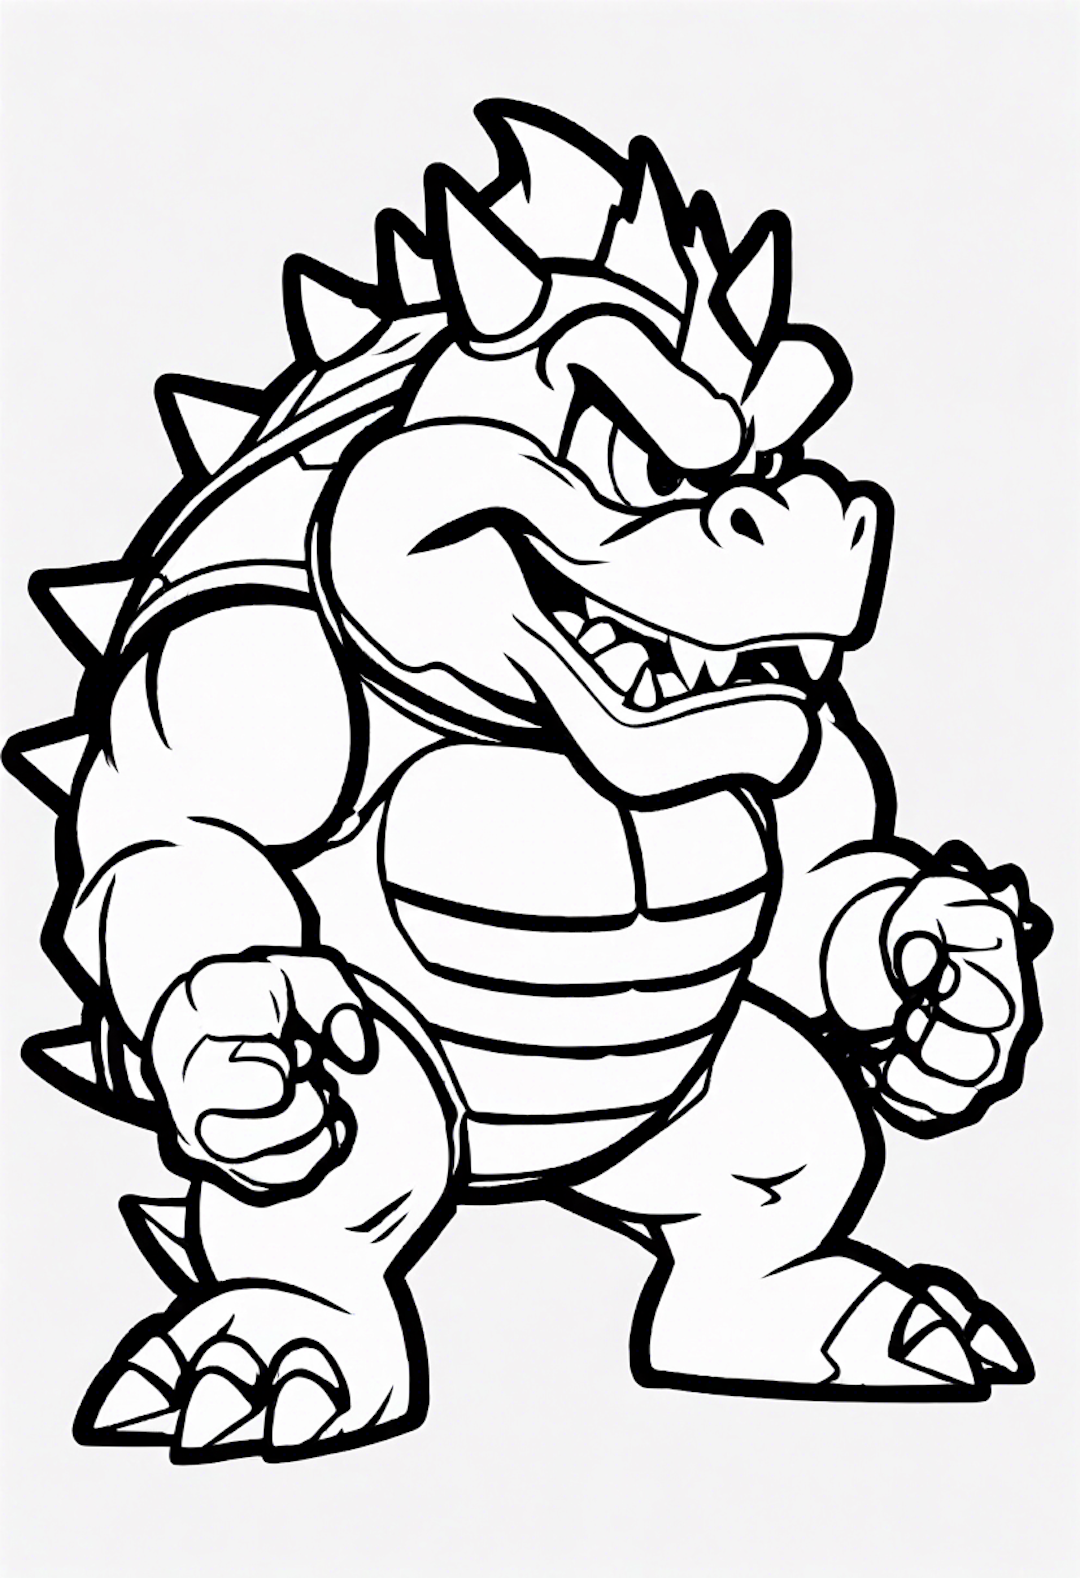 Bowser At The Hospital Getting Treated For A Friendly Coloring Twist